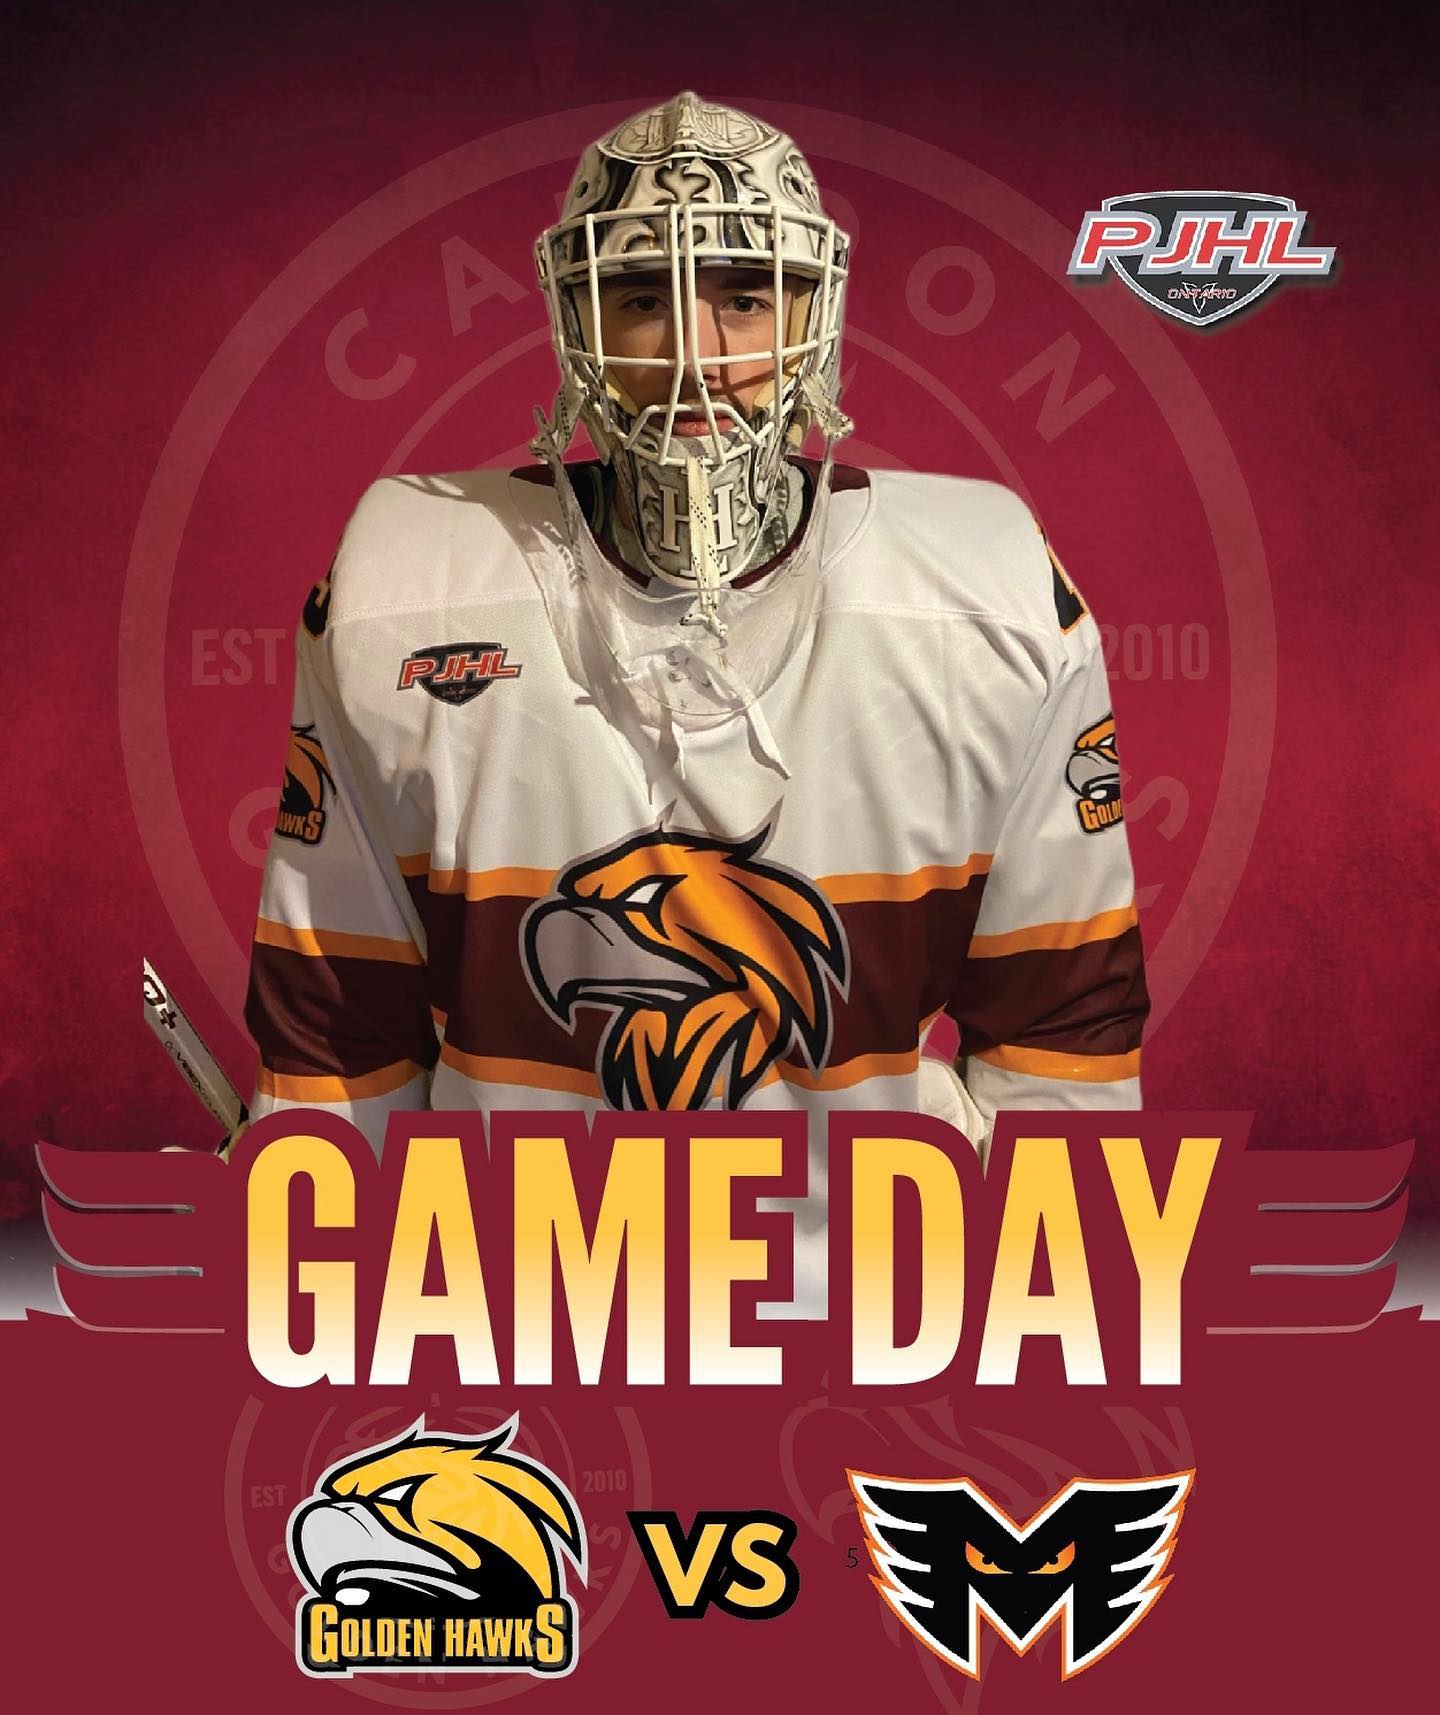 [ GAME DAY ] Your Caledon Golden Hawks rocking the new alternate jersey at home to take on the Midland Flyers! 2:30 pm Mayfield arena - Here we go now  #alternatejersey #caledongoldenhawks #letsgo #juniorbhockey #hockey #ontario #pjhl #oha #gthl #omha #spittinchicklets #laceup #eh #gameon #gametime #ot #shootout #toedrag #dangle #deke #shoot